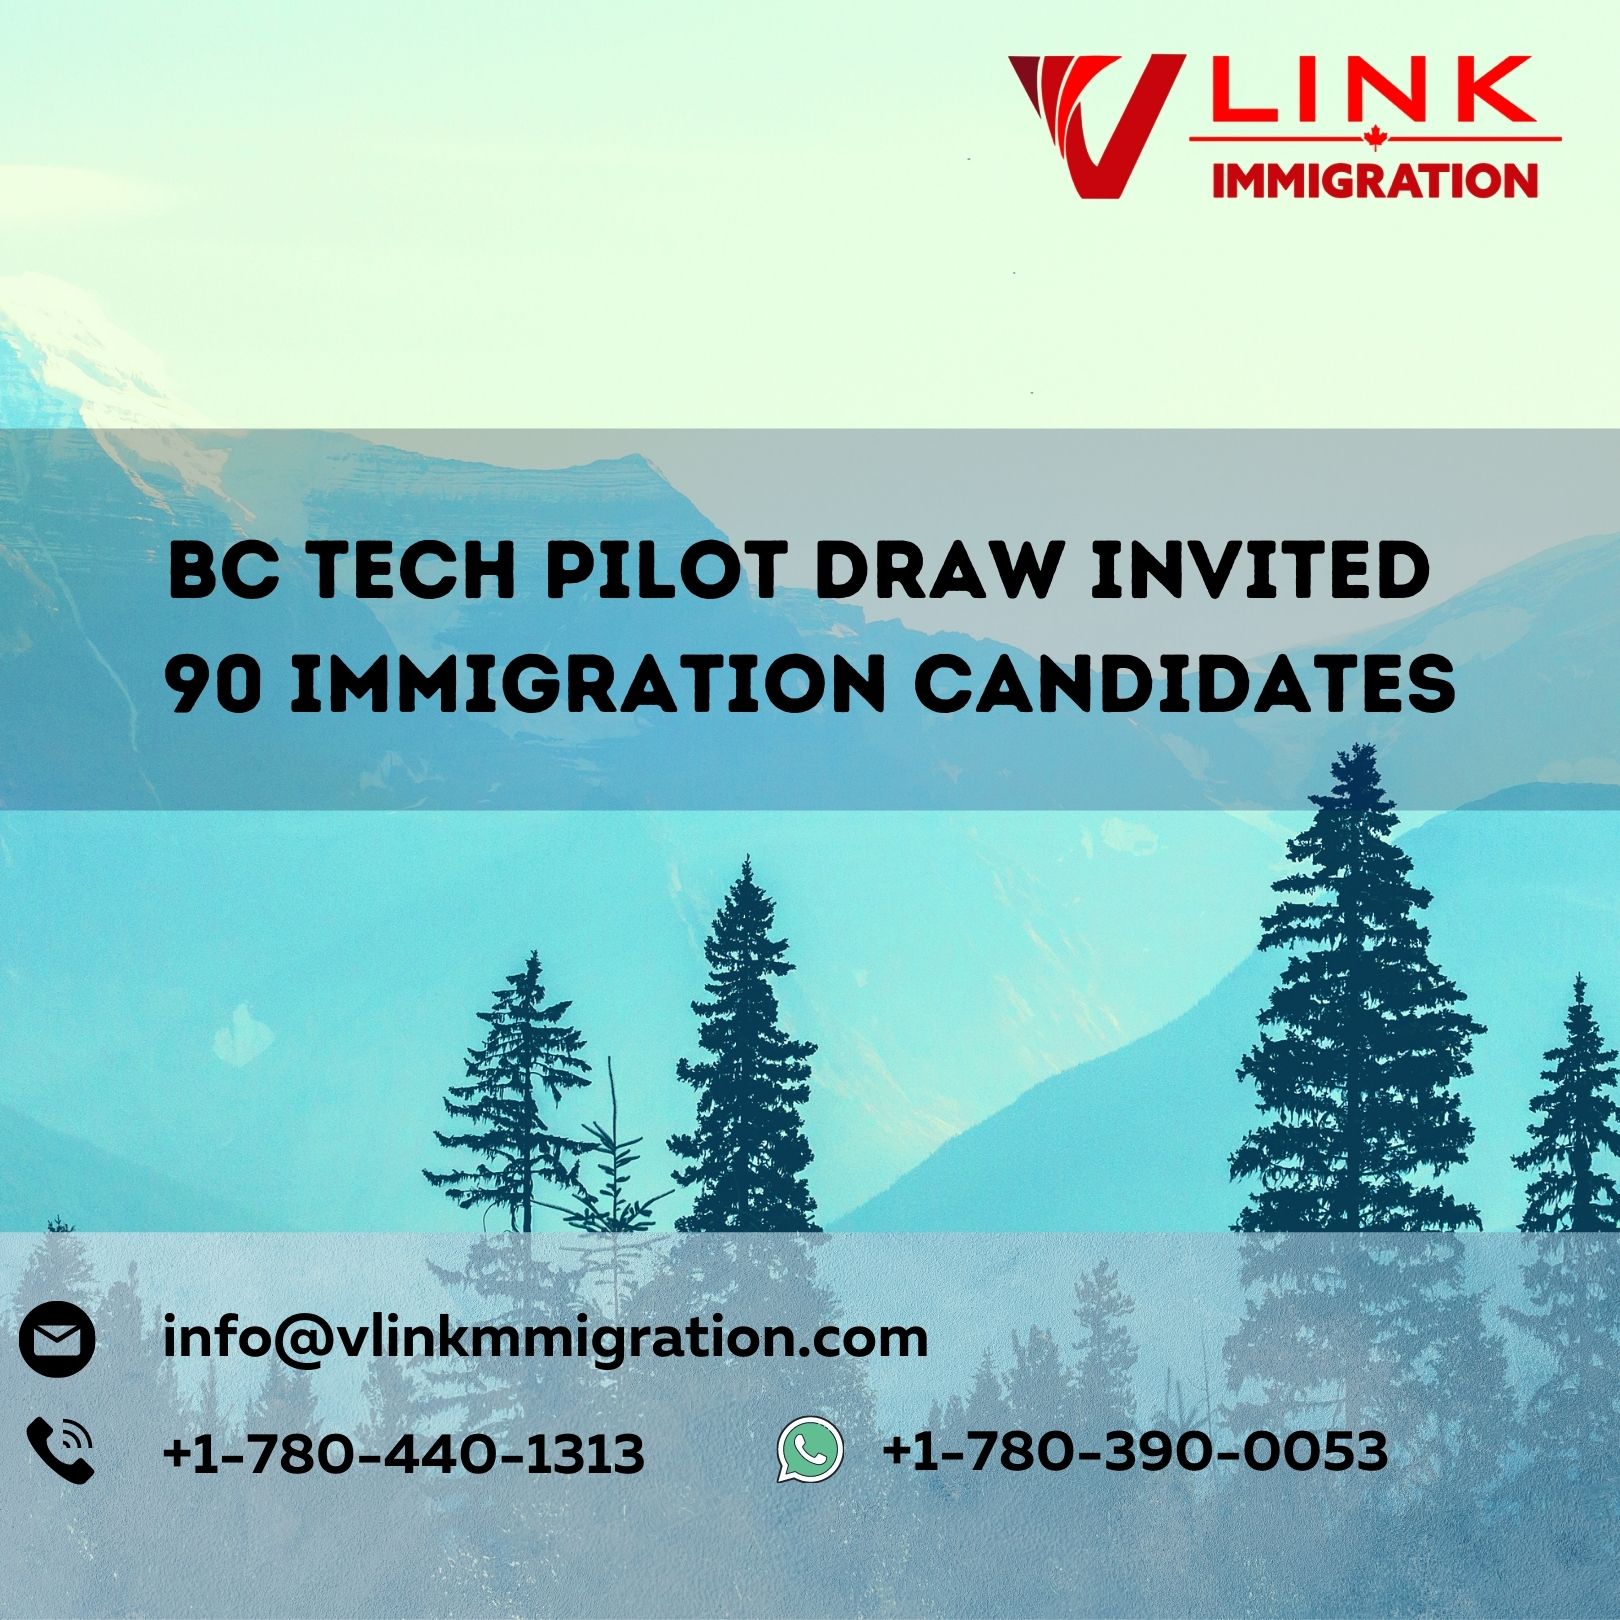 work permit,canadian immigration, cic processing time, immigration refugees and citizenship canada , express entry draws, canadian permanent residency,visitor visa extension, Saskatchewan immigrants nominee program, new immigration programs, tech pilot draw